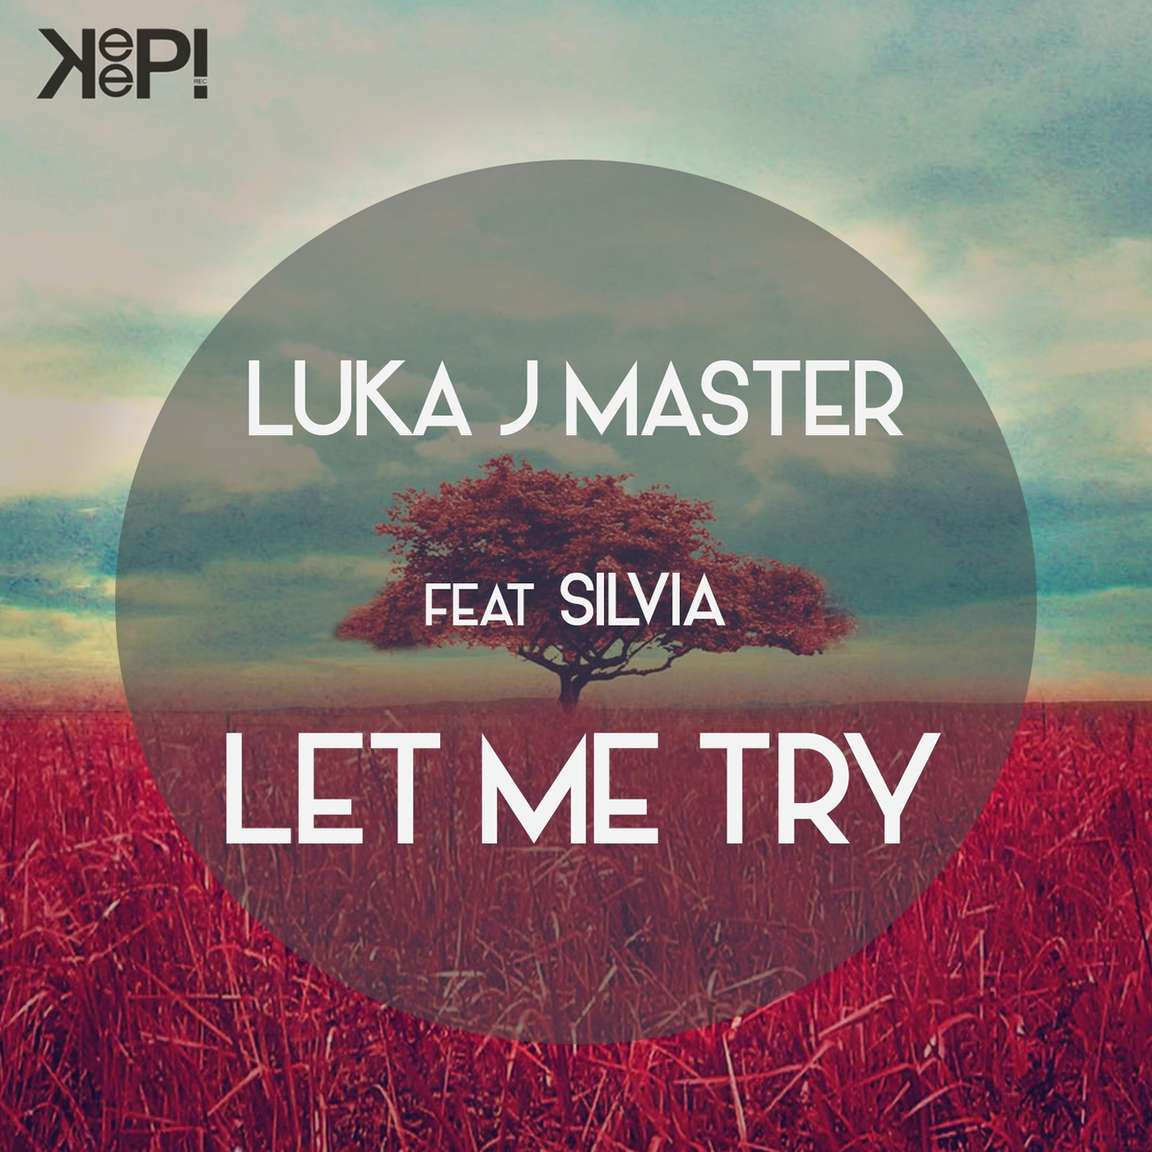 Luka J Master feat. Silvia - Let Me Try (Edit) (2015)